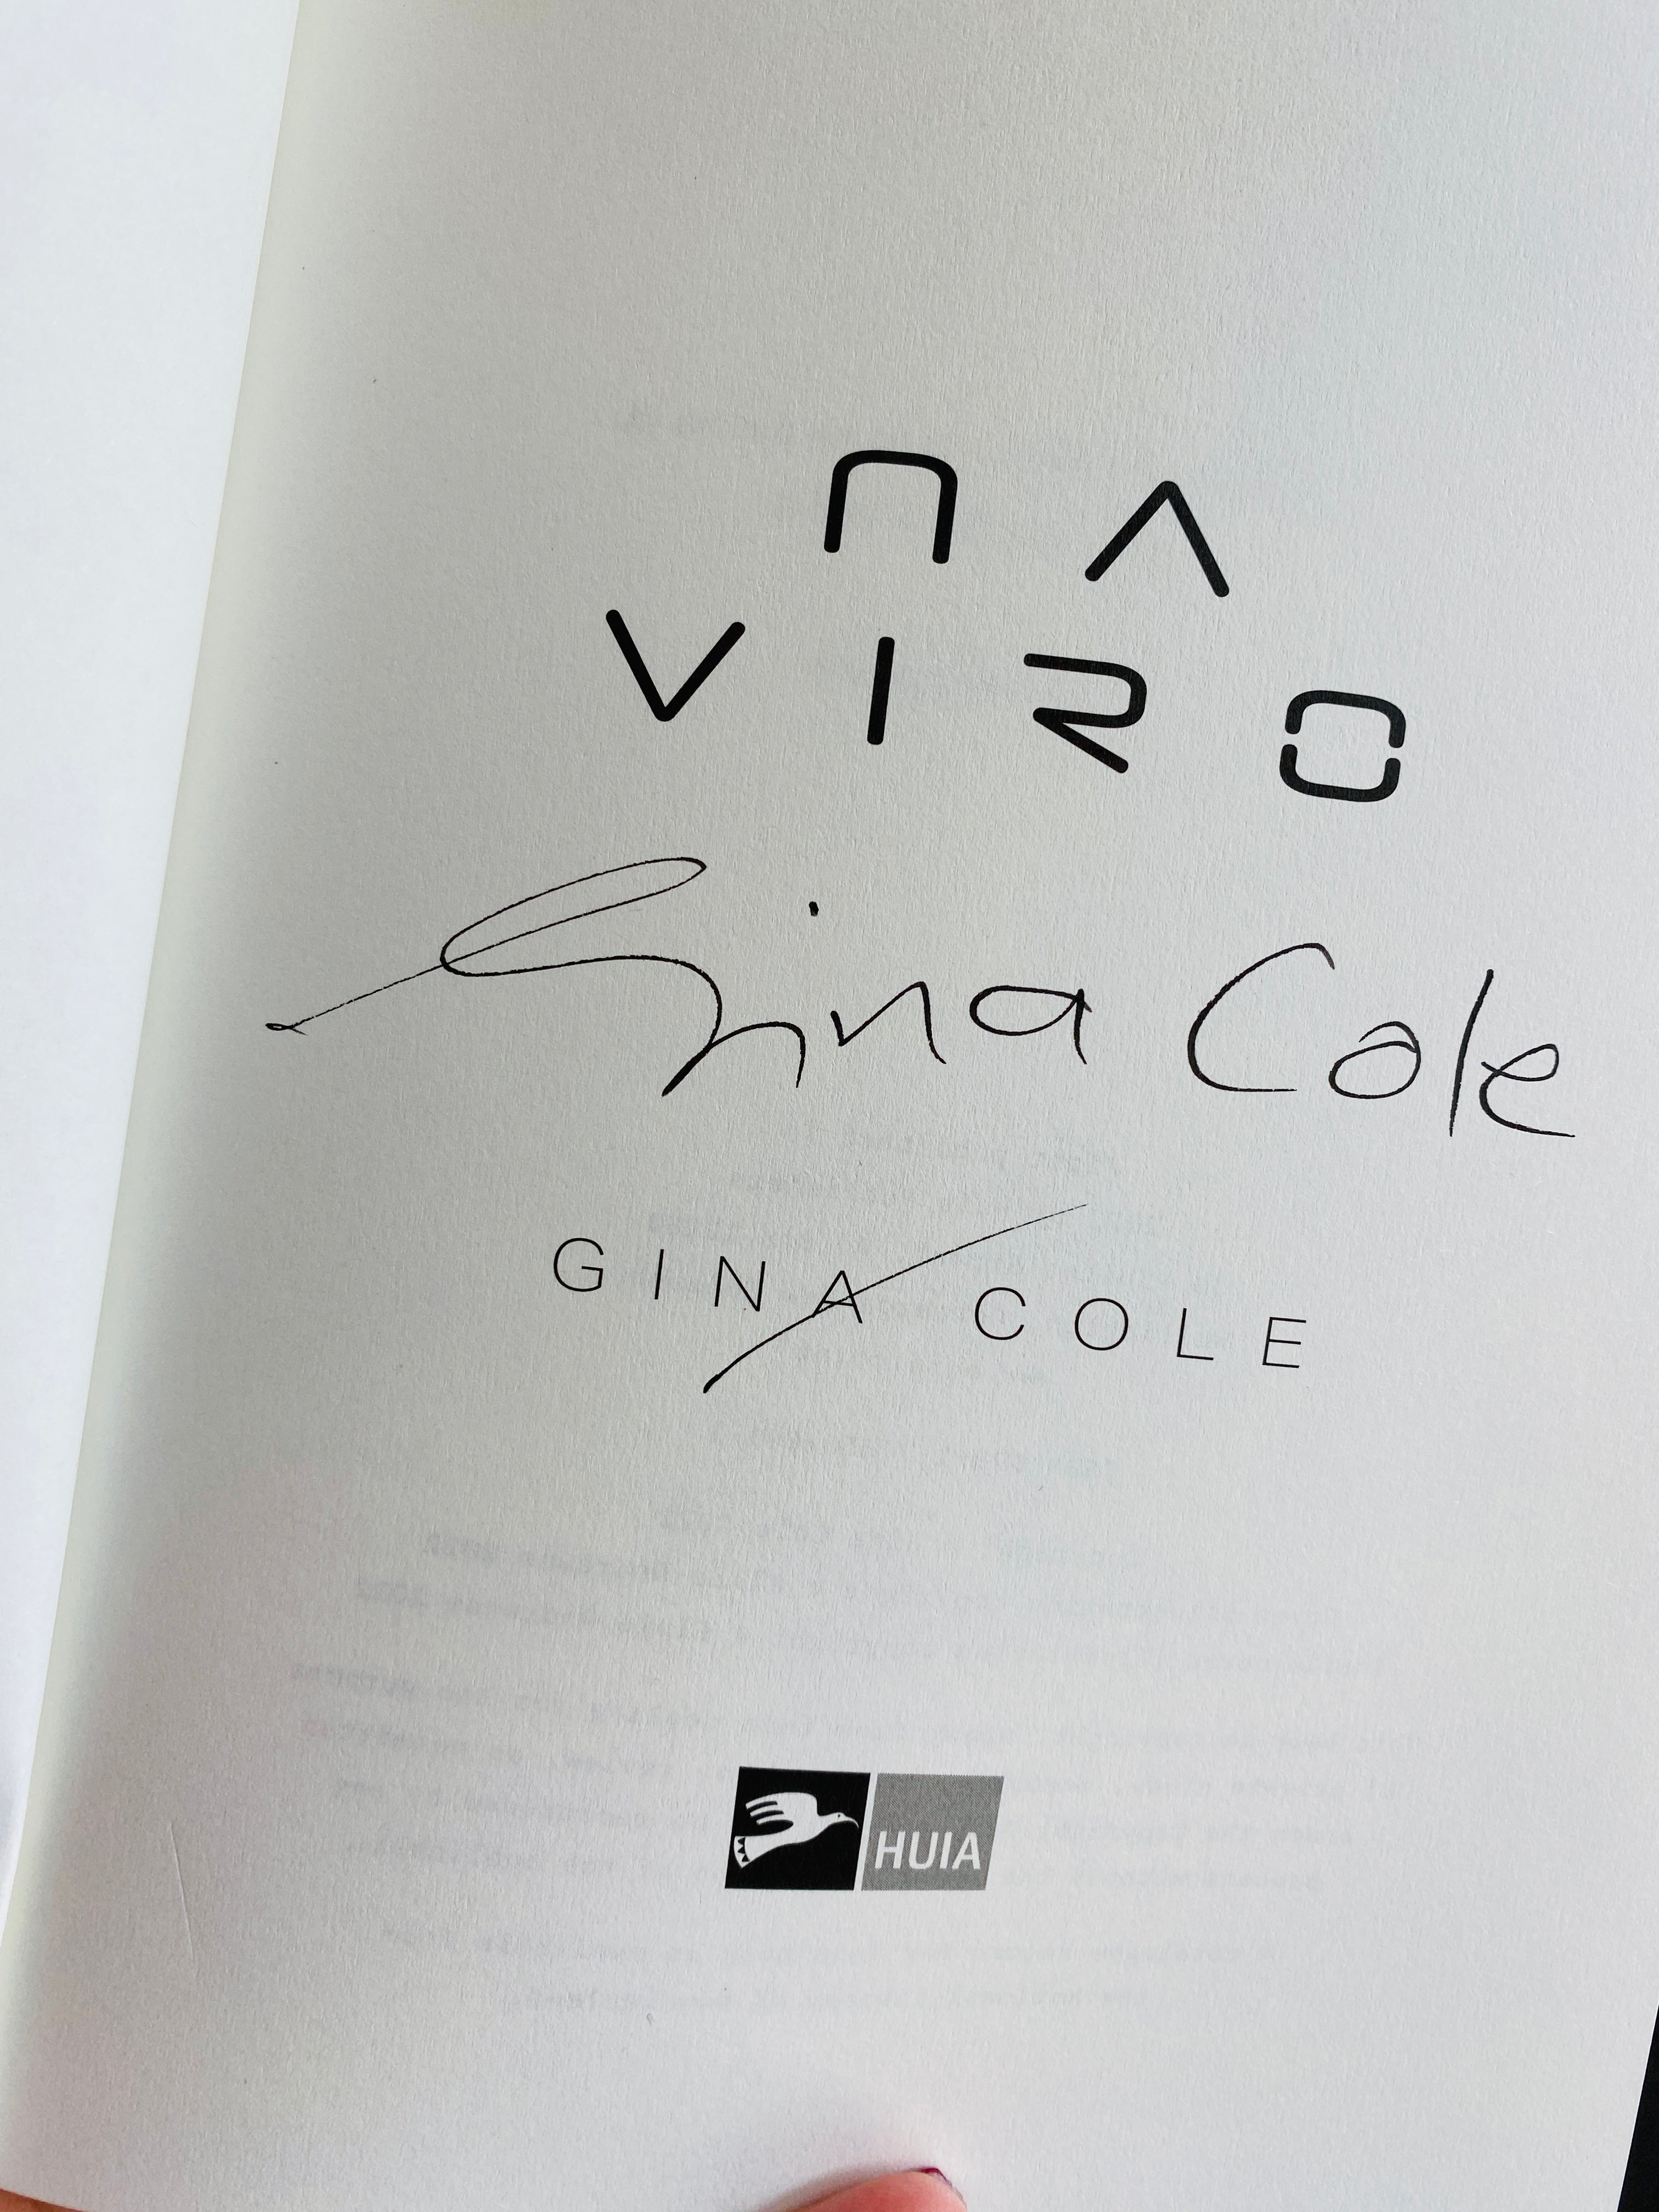 Na Viro by Gina Cole - Books signed by the author